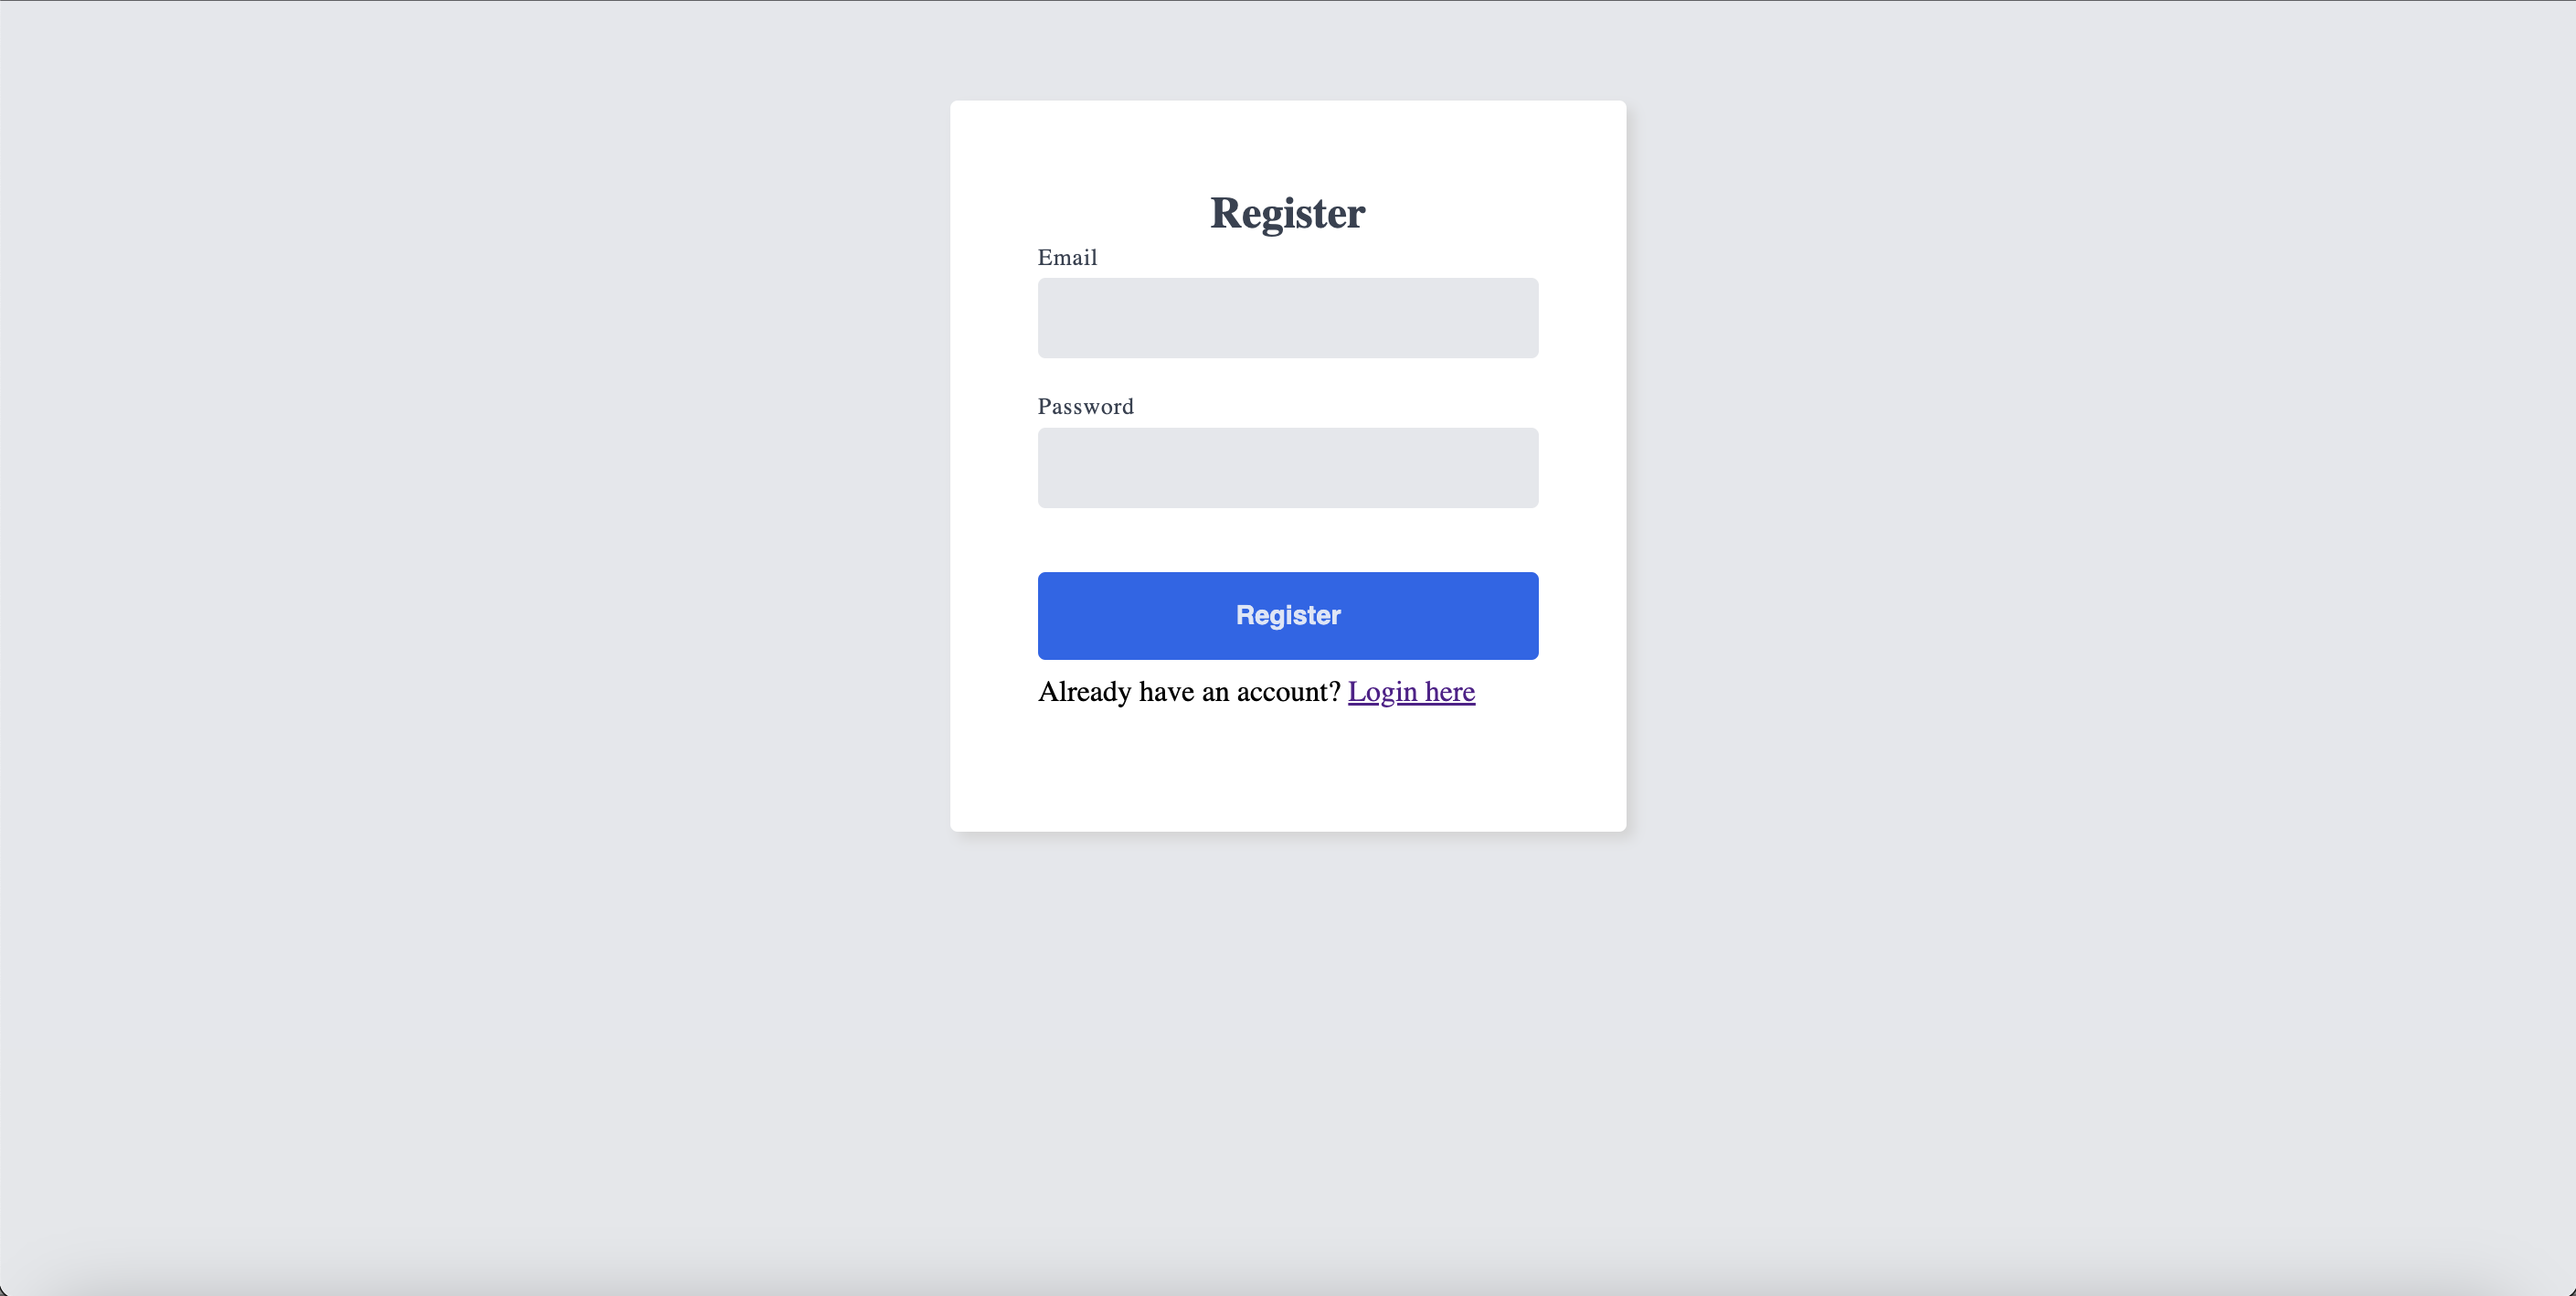 A Login page showing page title, inputs and register button